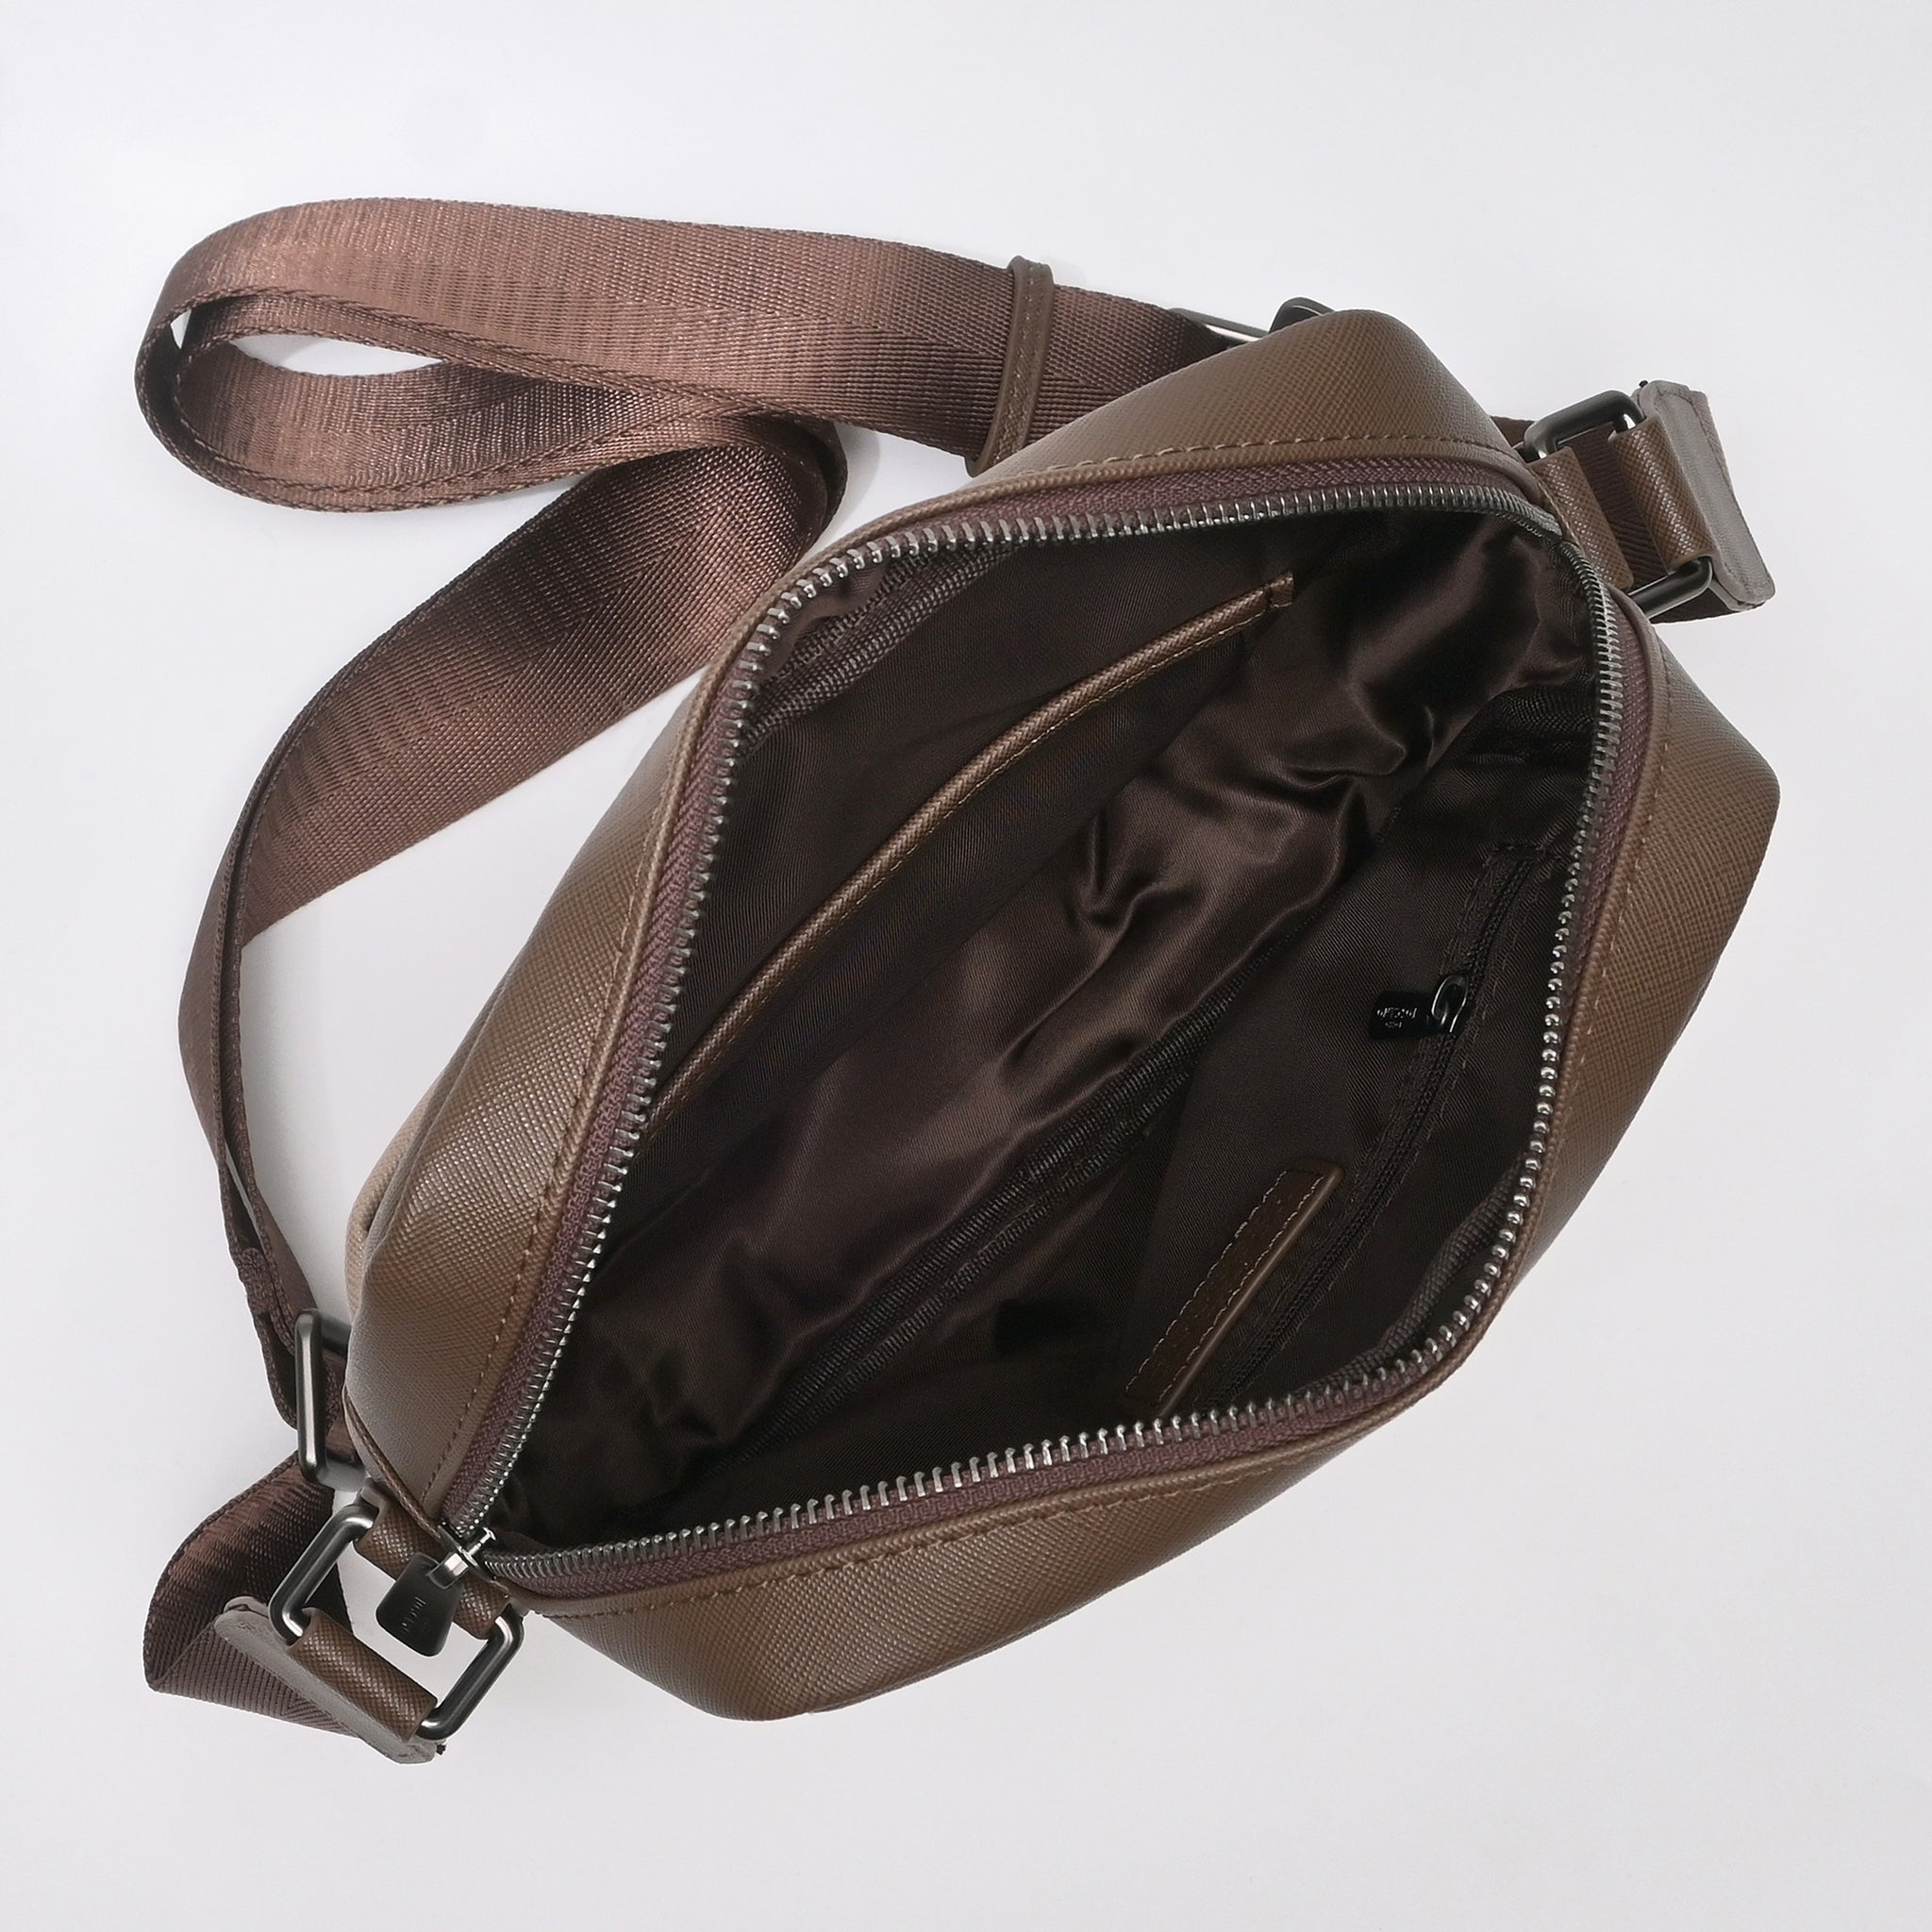 Camel Sling Bag With Small Key Pouch - TGSB1233PN3MK3